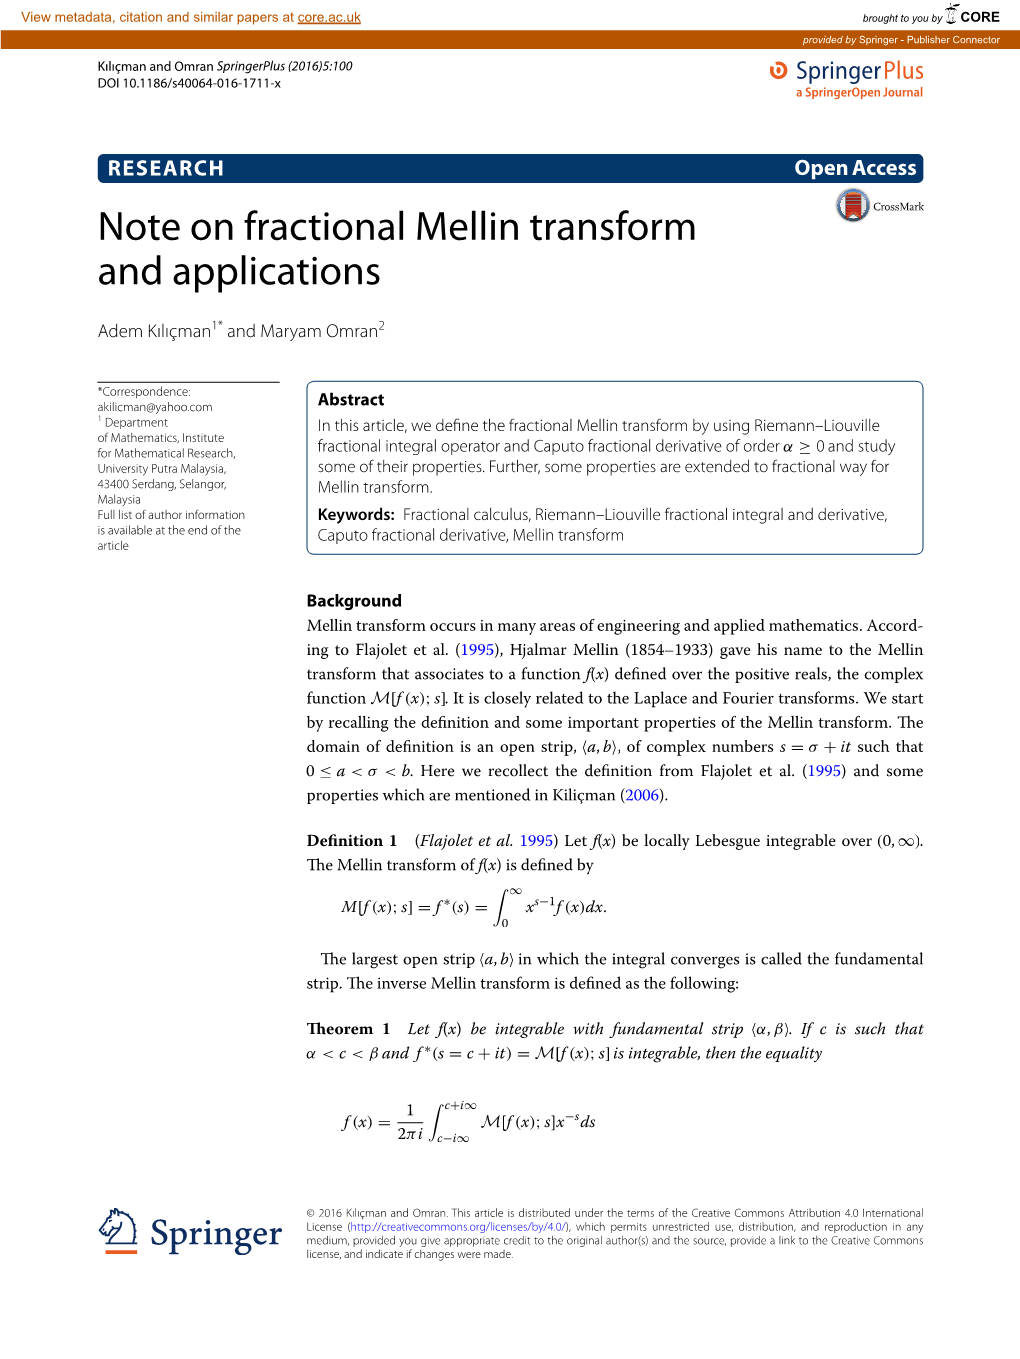 Note on Fractional Mellin Transform and Applications